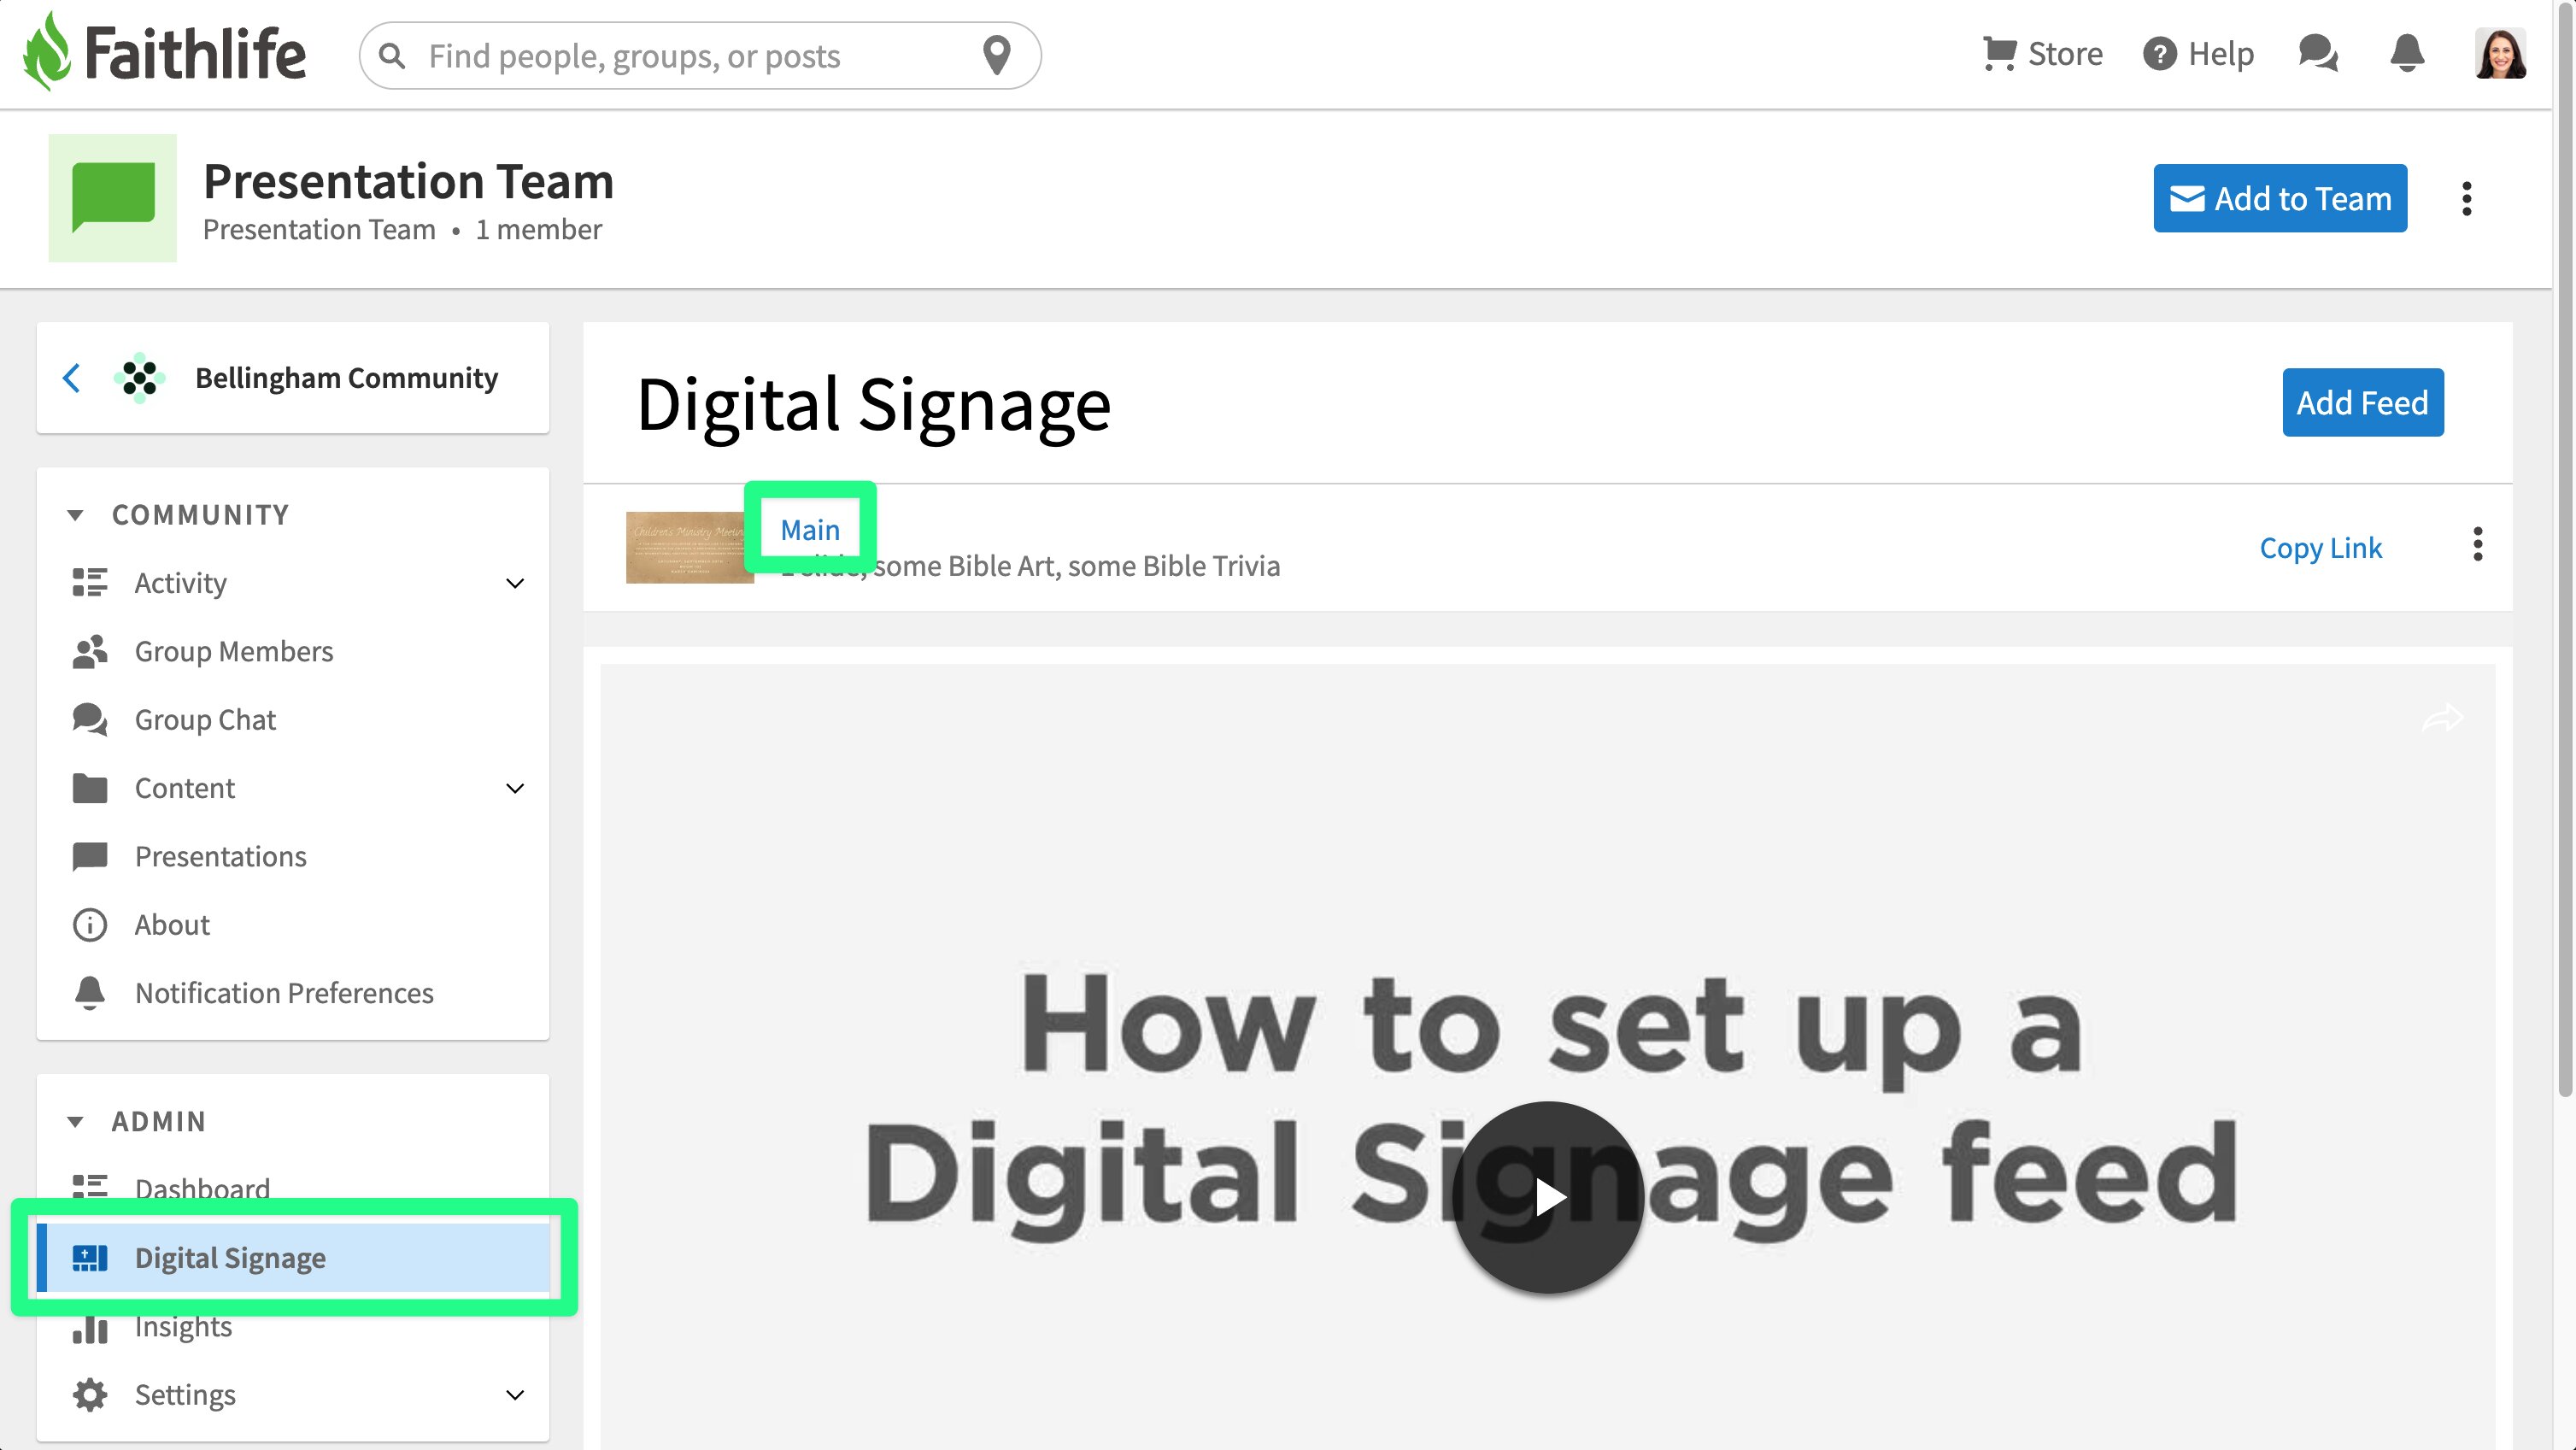 Open digital signage link from dashboard